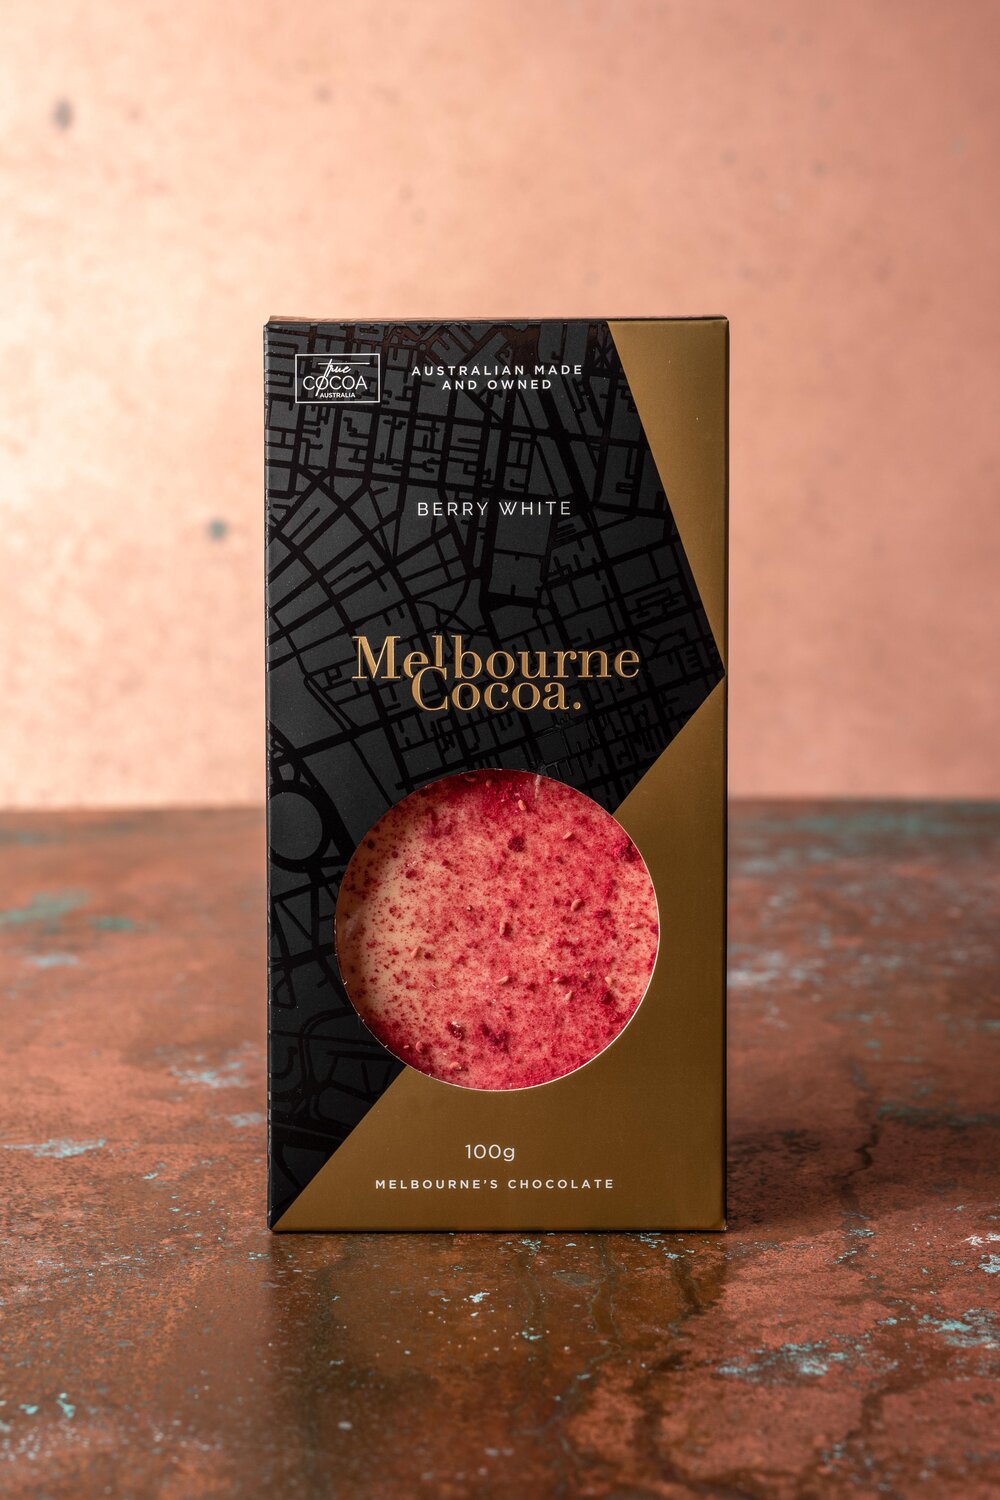 Berry White Chocolate Block by Melbourne Cocoa